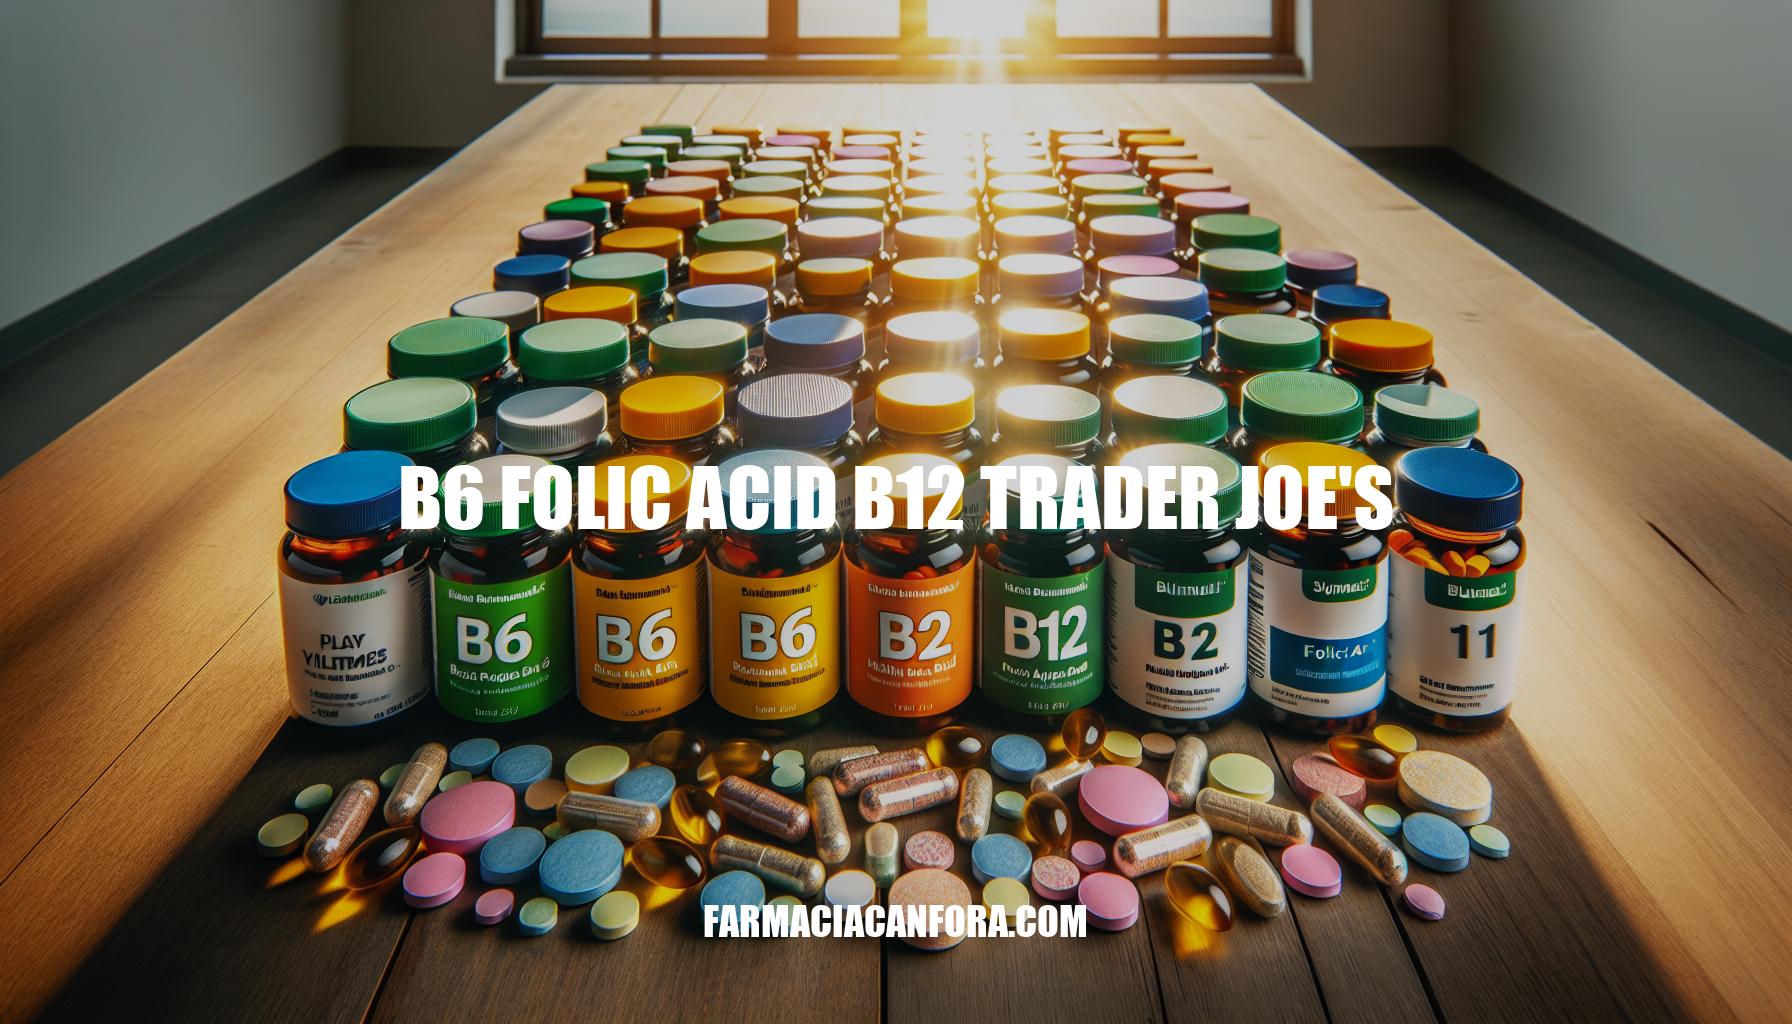 The Ultimate Guide to B6 Folic Acid B12 Trader Joe's Supplements